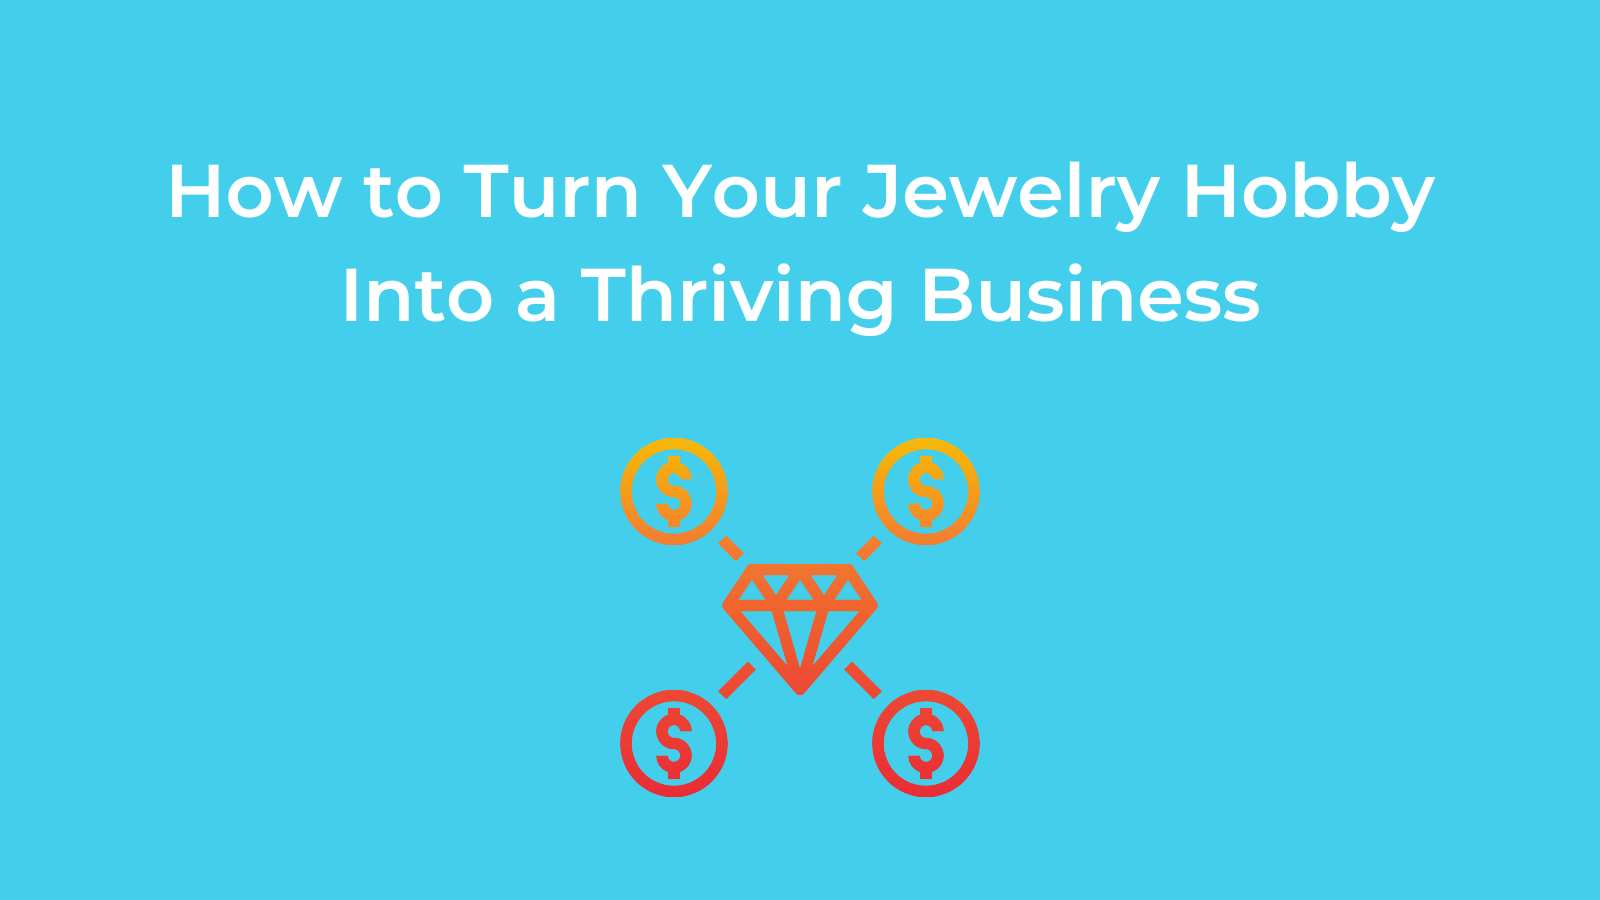 How to Turn Your Jewelry Hobby Into a Thriving Business